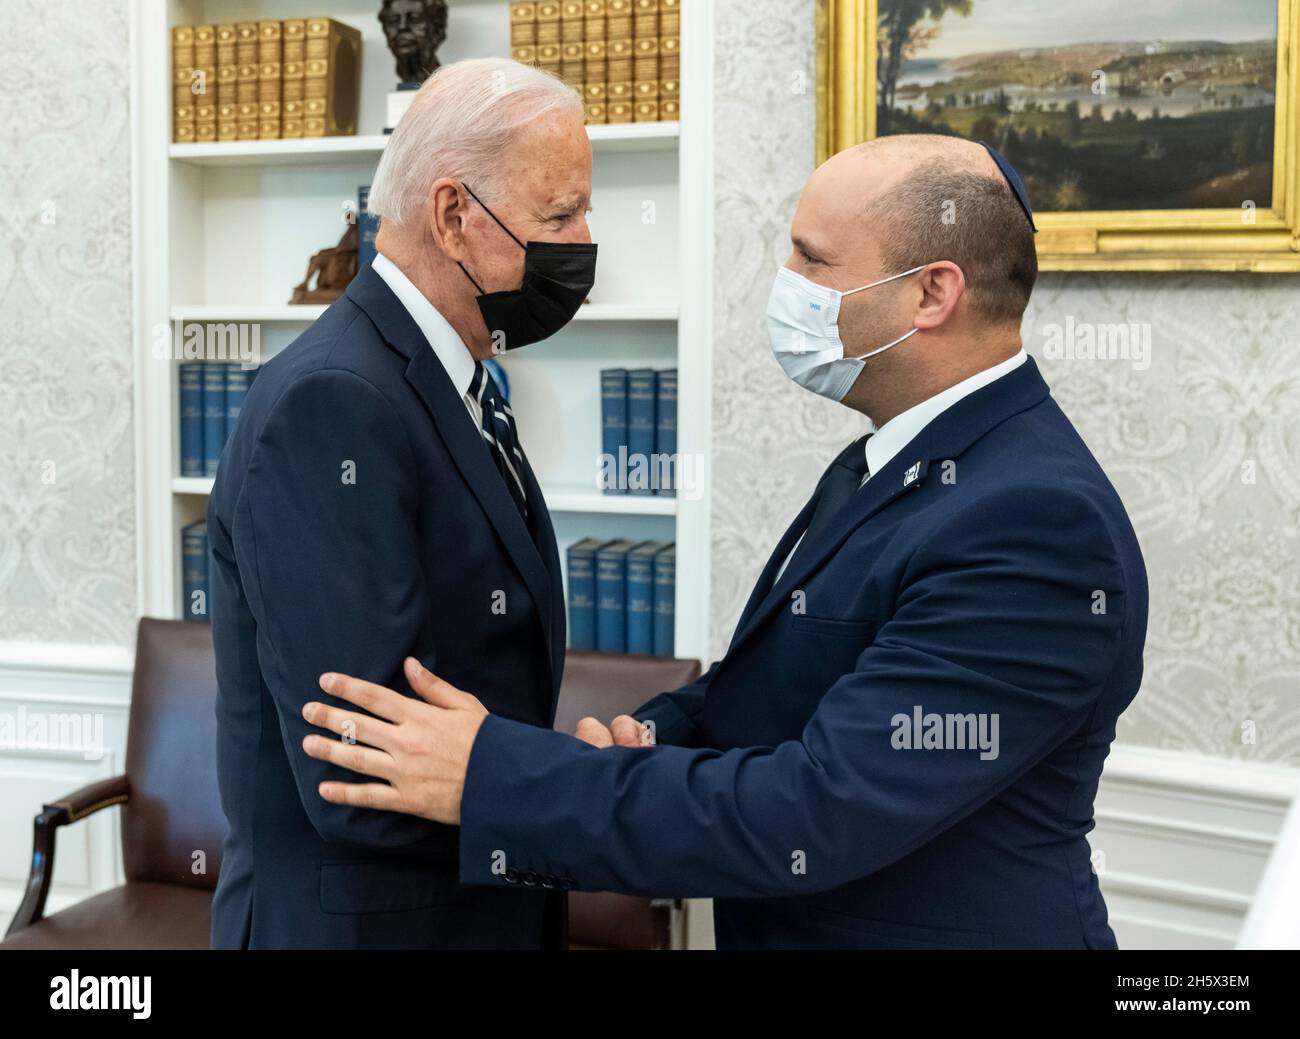 Washington, United States. 27 August, 2021. U.S. President Joe Biden welcomes Israeli Prime Minister Naftali Bennett, right, prior to their bilateral meeting in the Oval Office of the White House August 27, 2021 in Washington, D.C. Credit: Adam Schultz/White House Photo/Alamy Live News Stock Photo